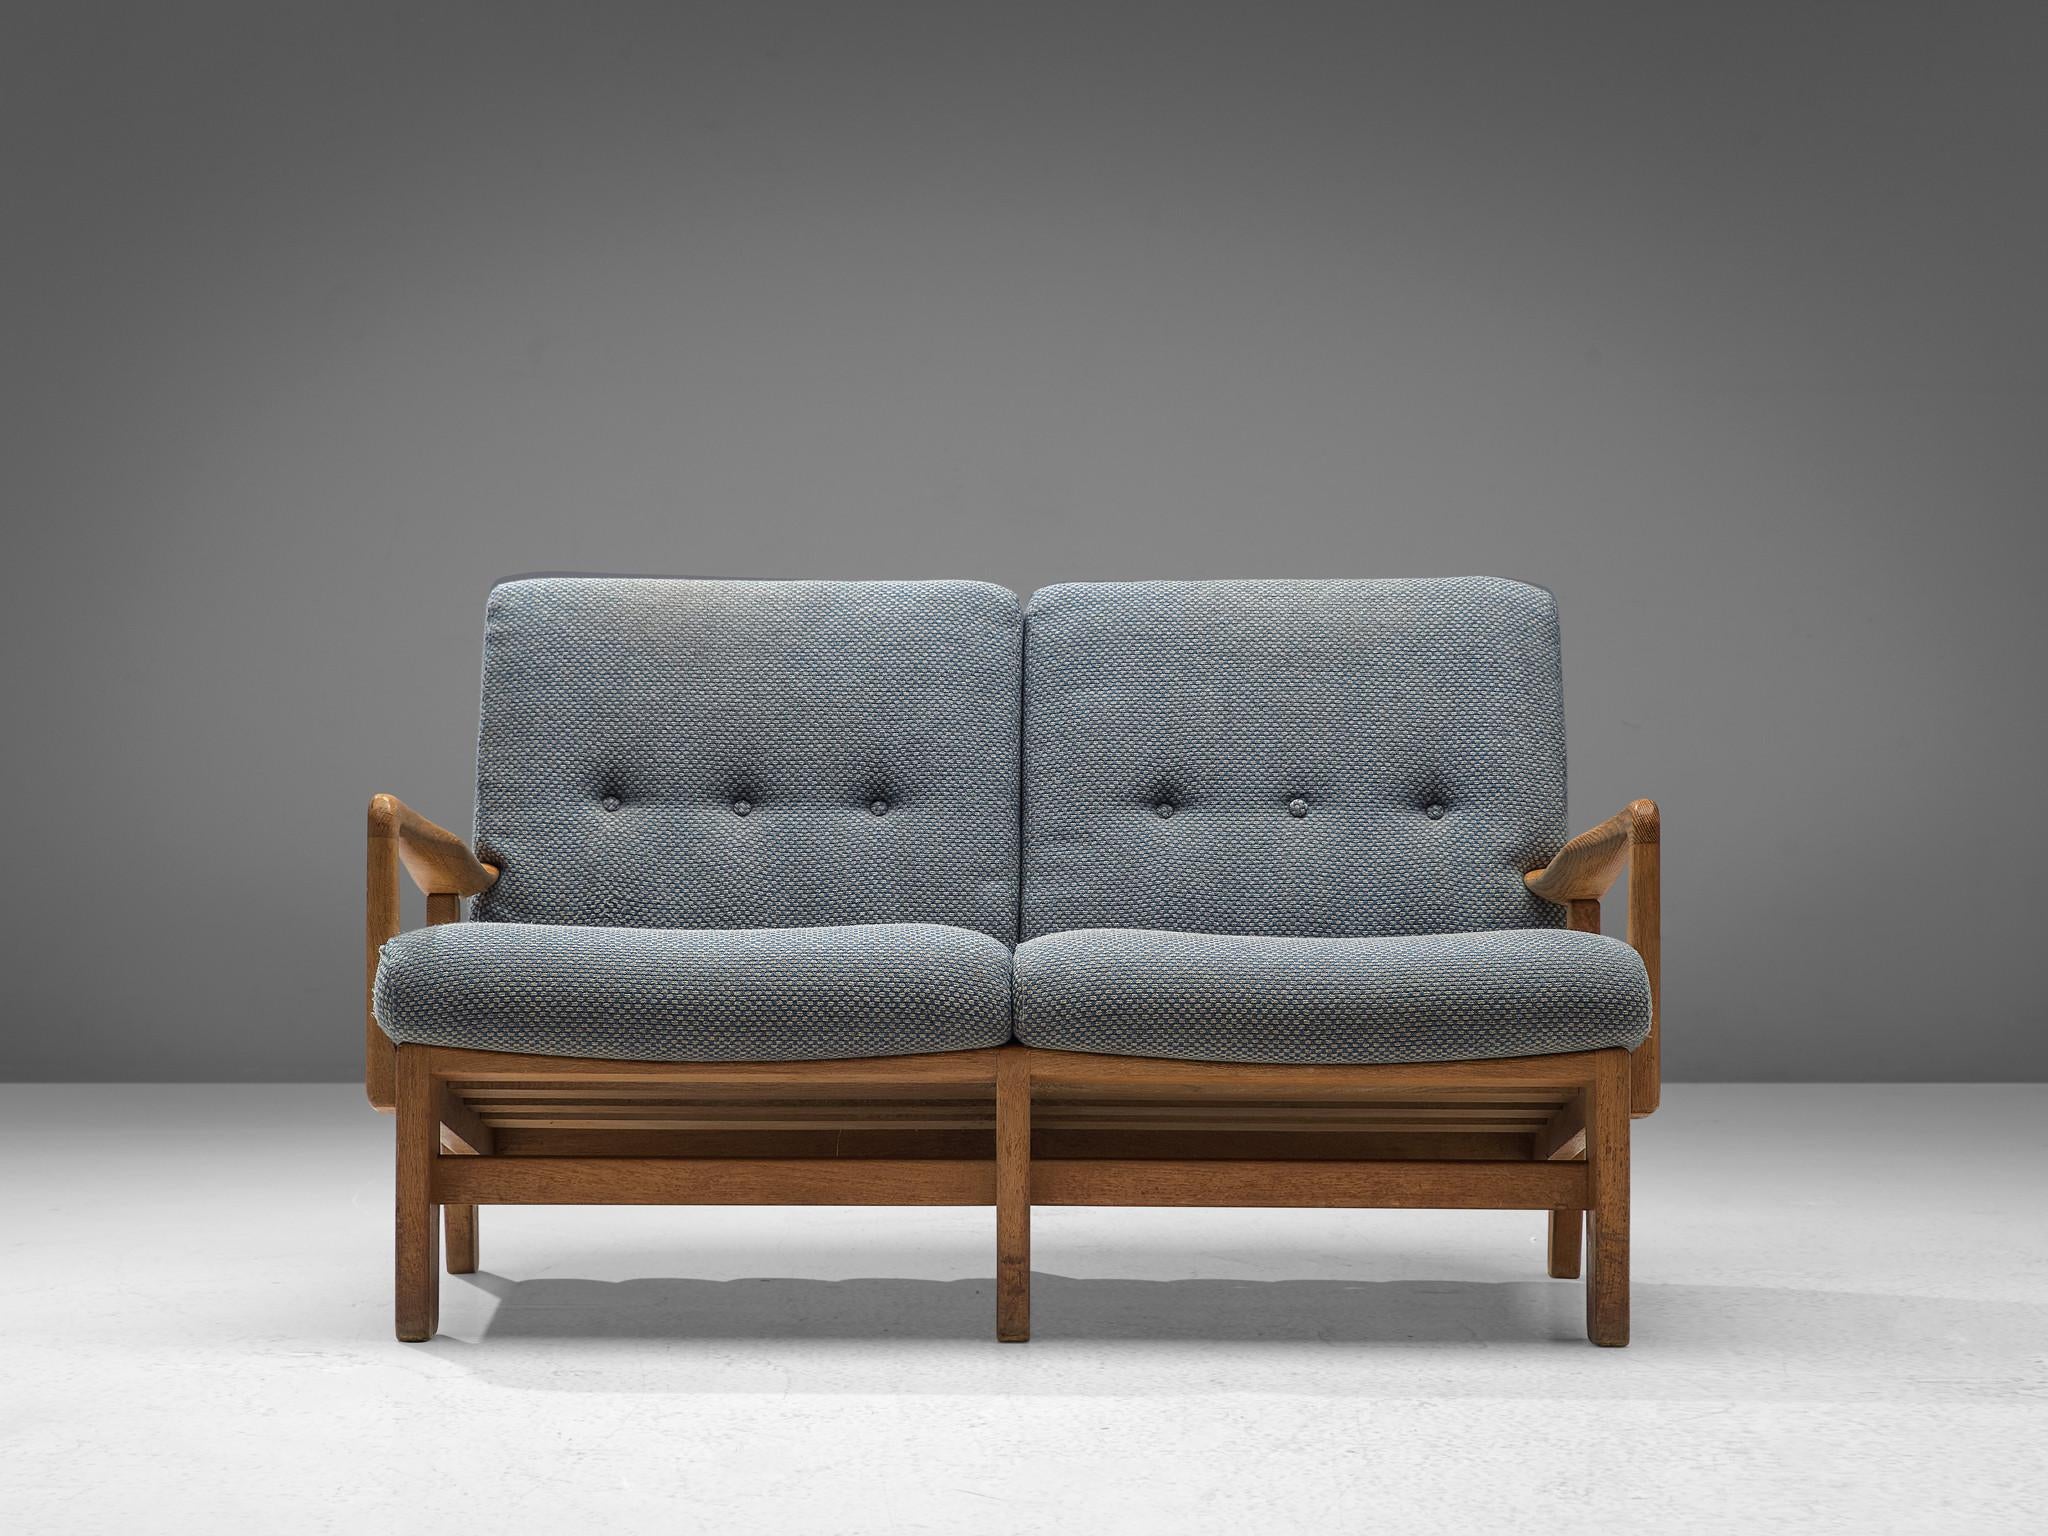 Guillerme & Chambron Sofa in Soft Blue Upholstery